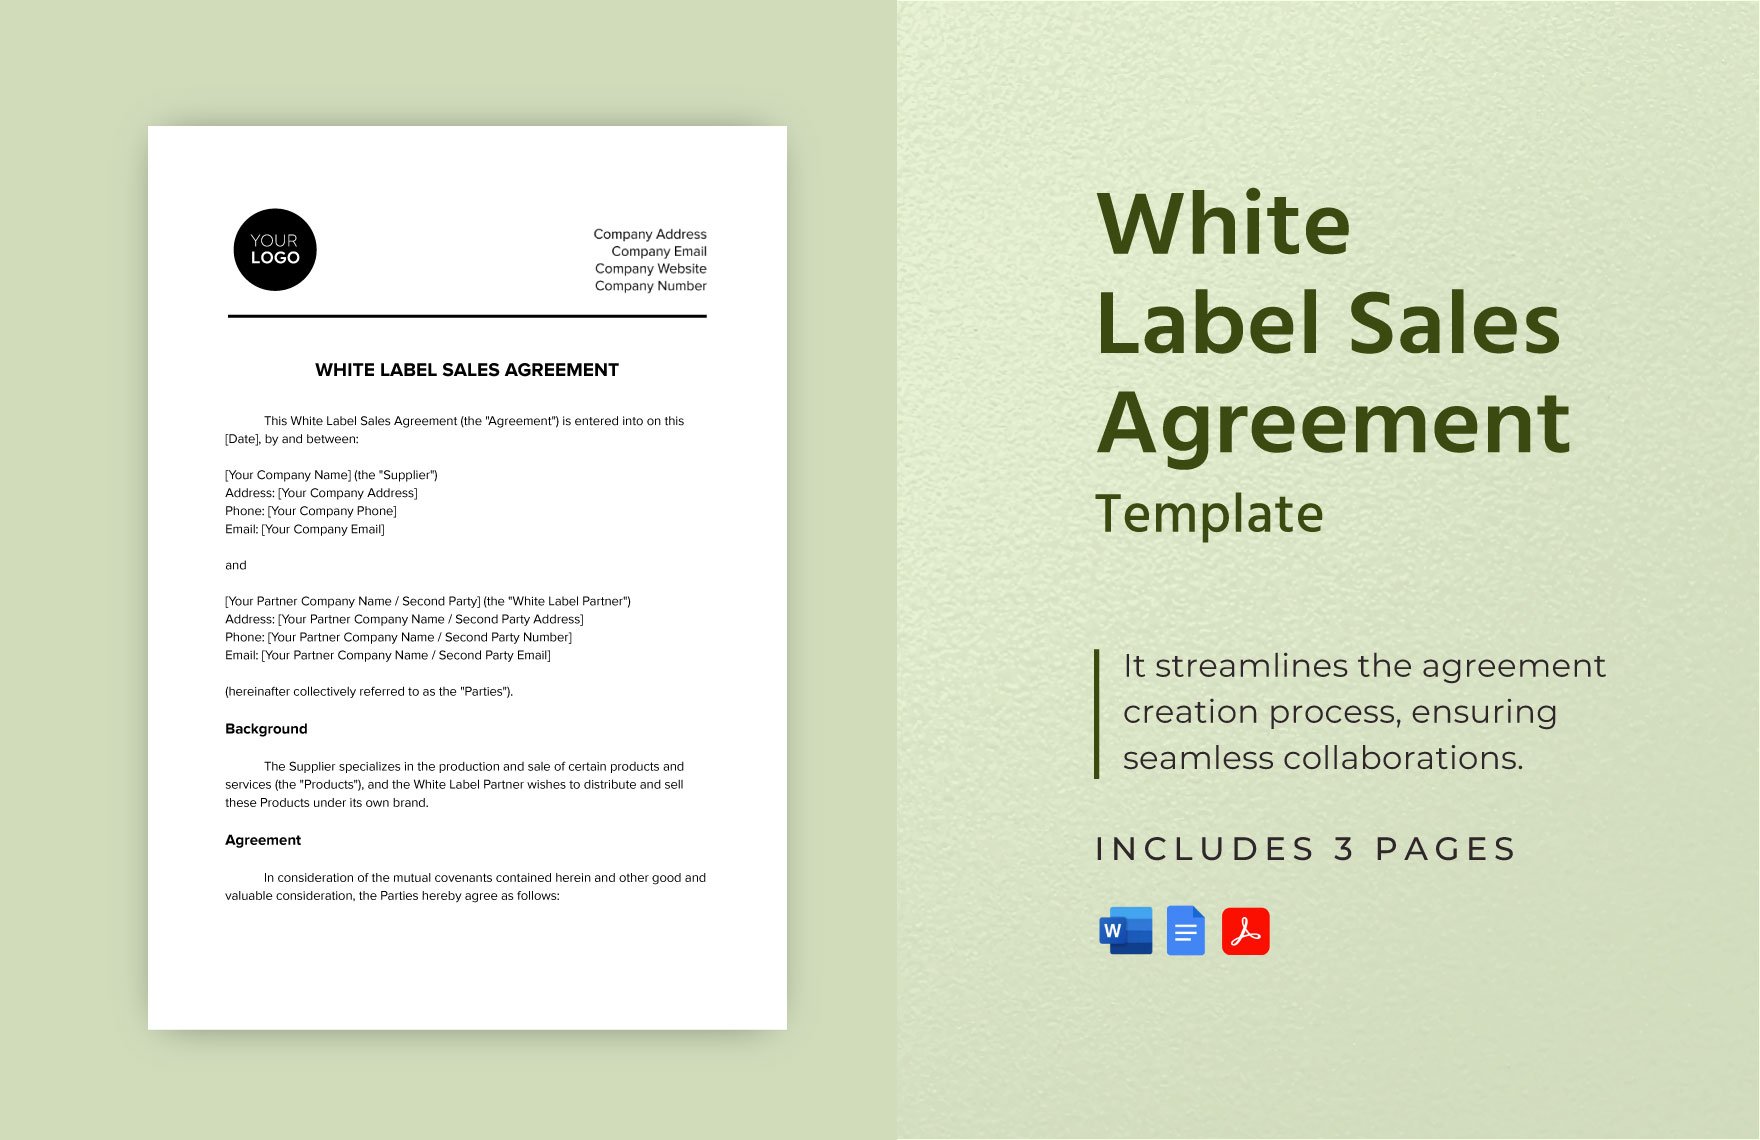 White Label Sales Agreement Template in Word, Google Docs, PDF